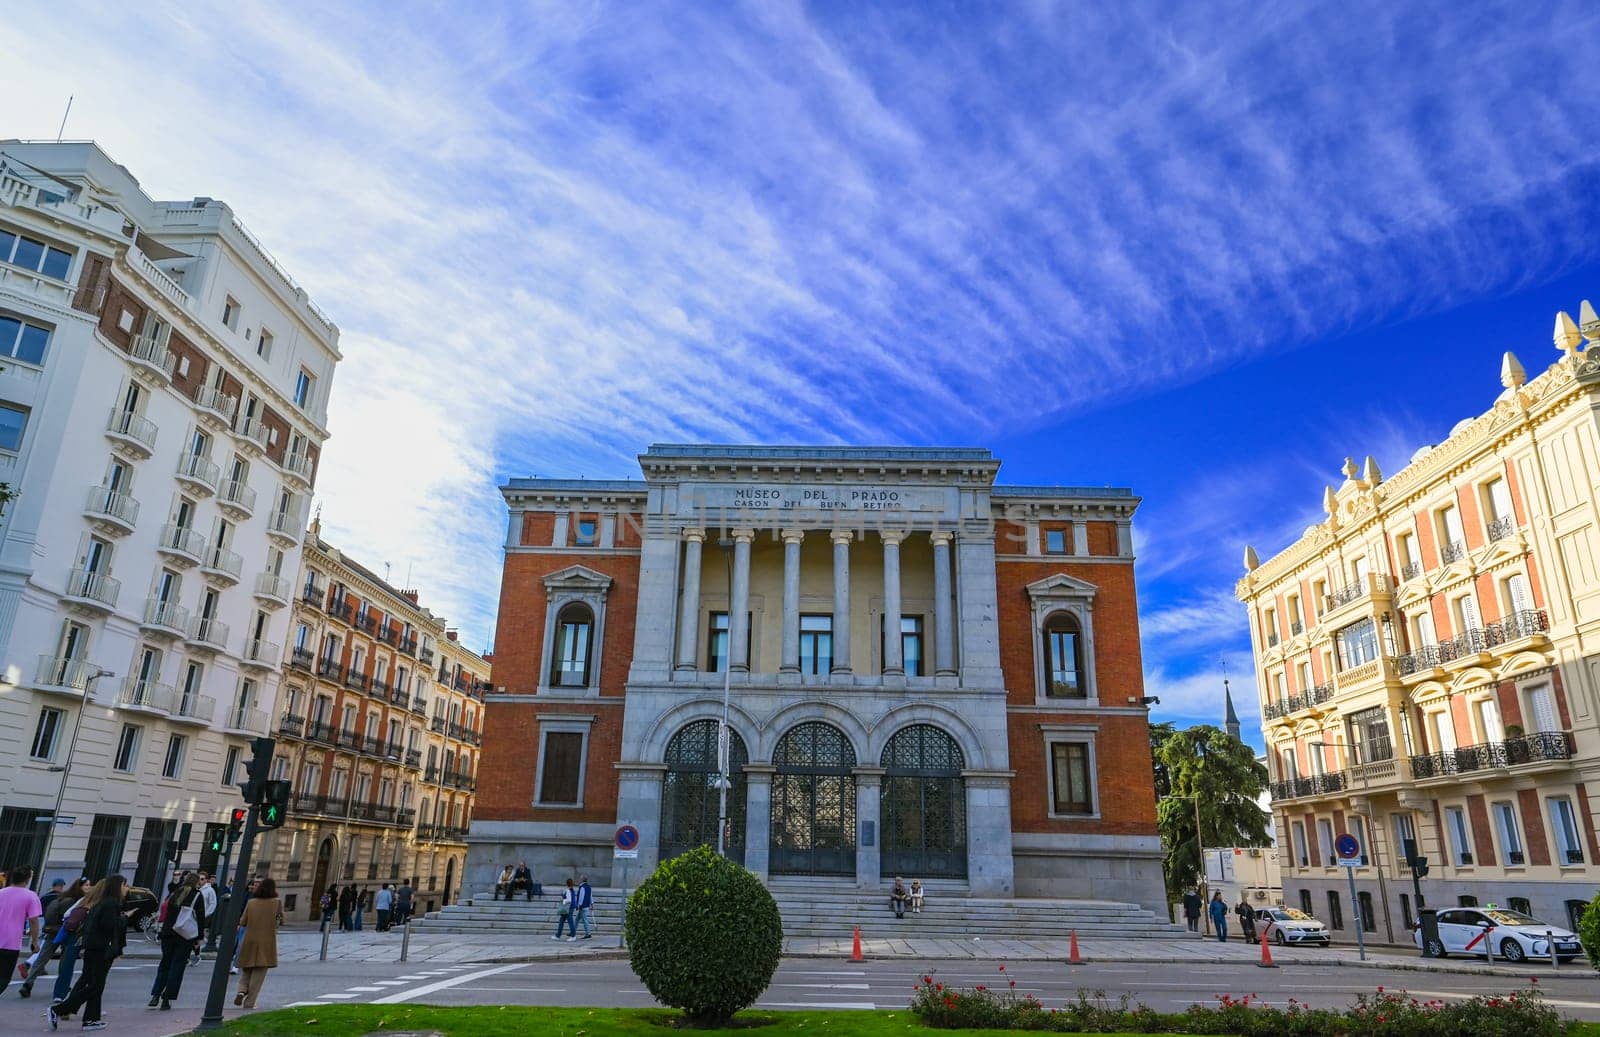 Facade of the National Prado Museum, the most important museum in Madrid and one of the most important art museums in the world. Madrid Spain. High quality photo